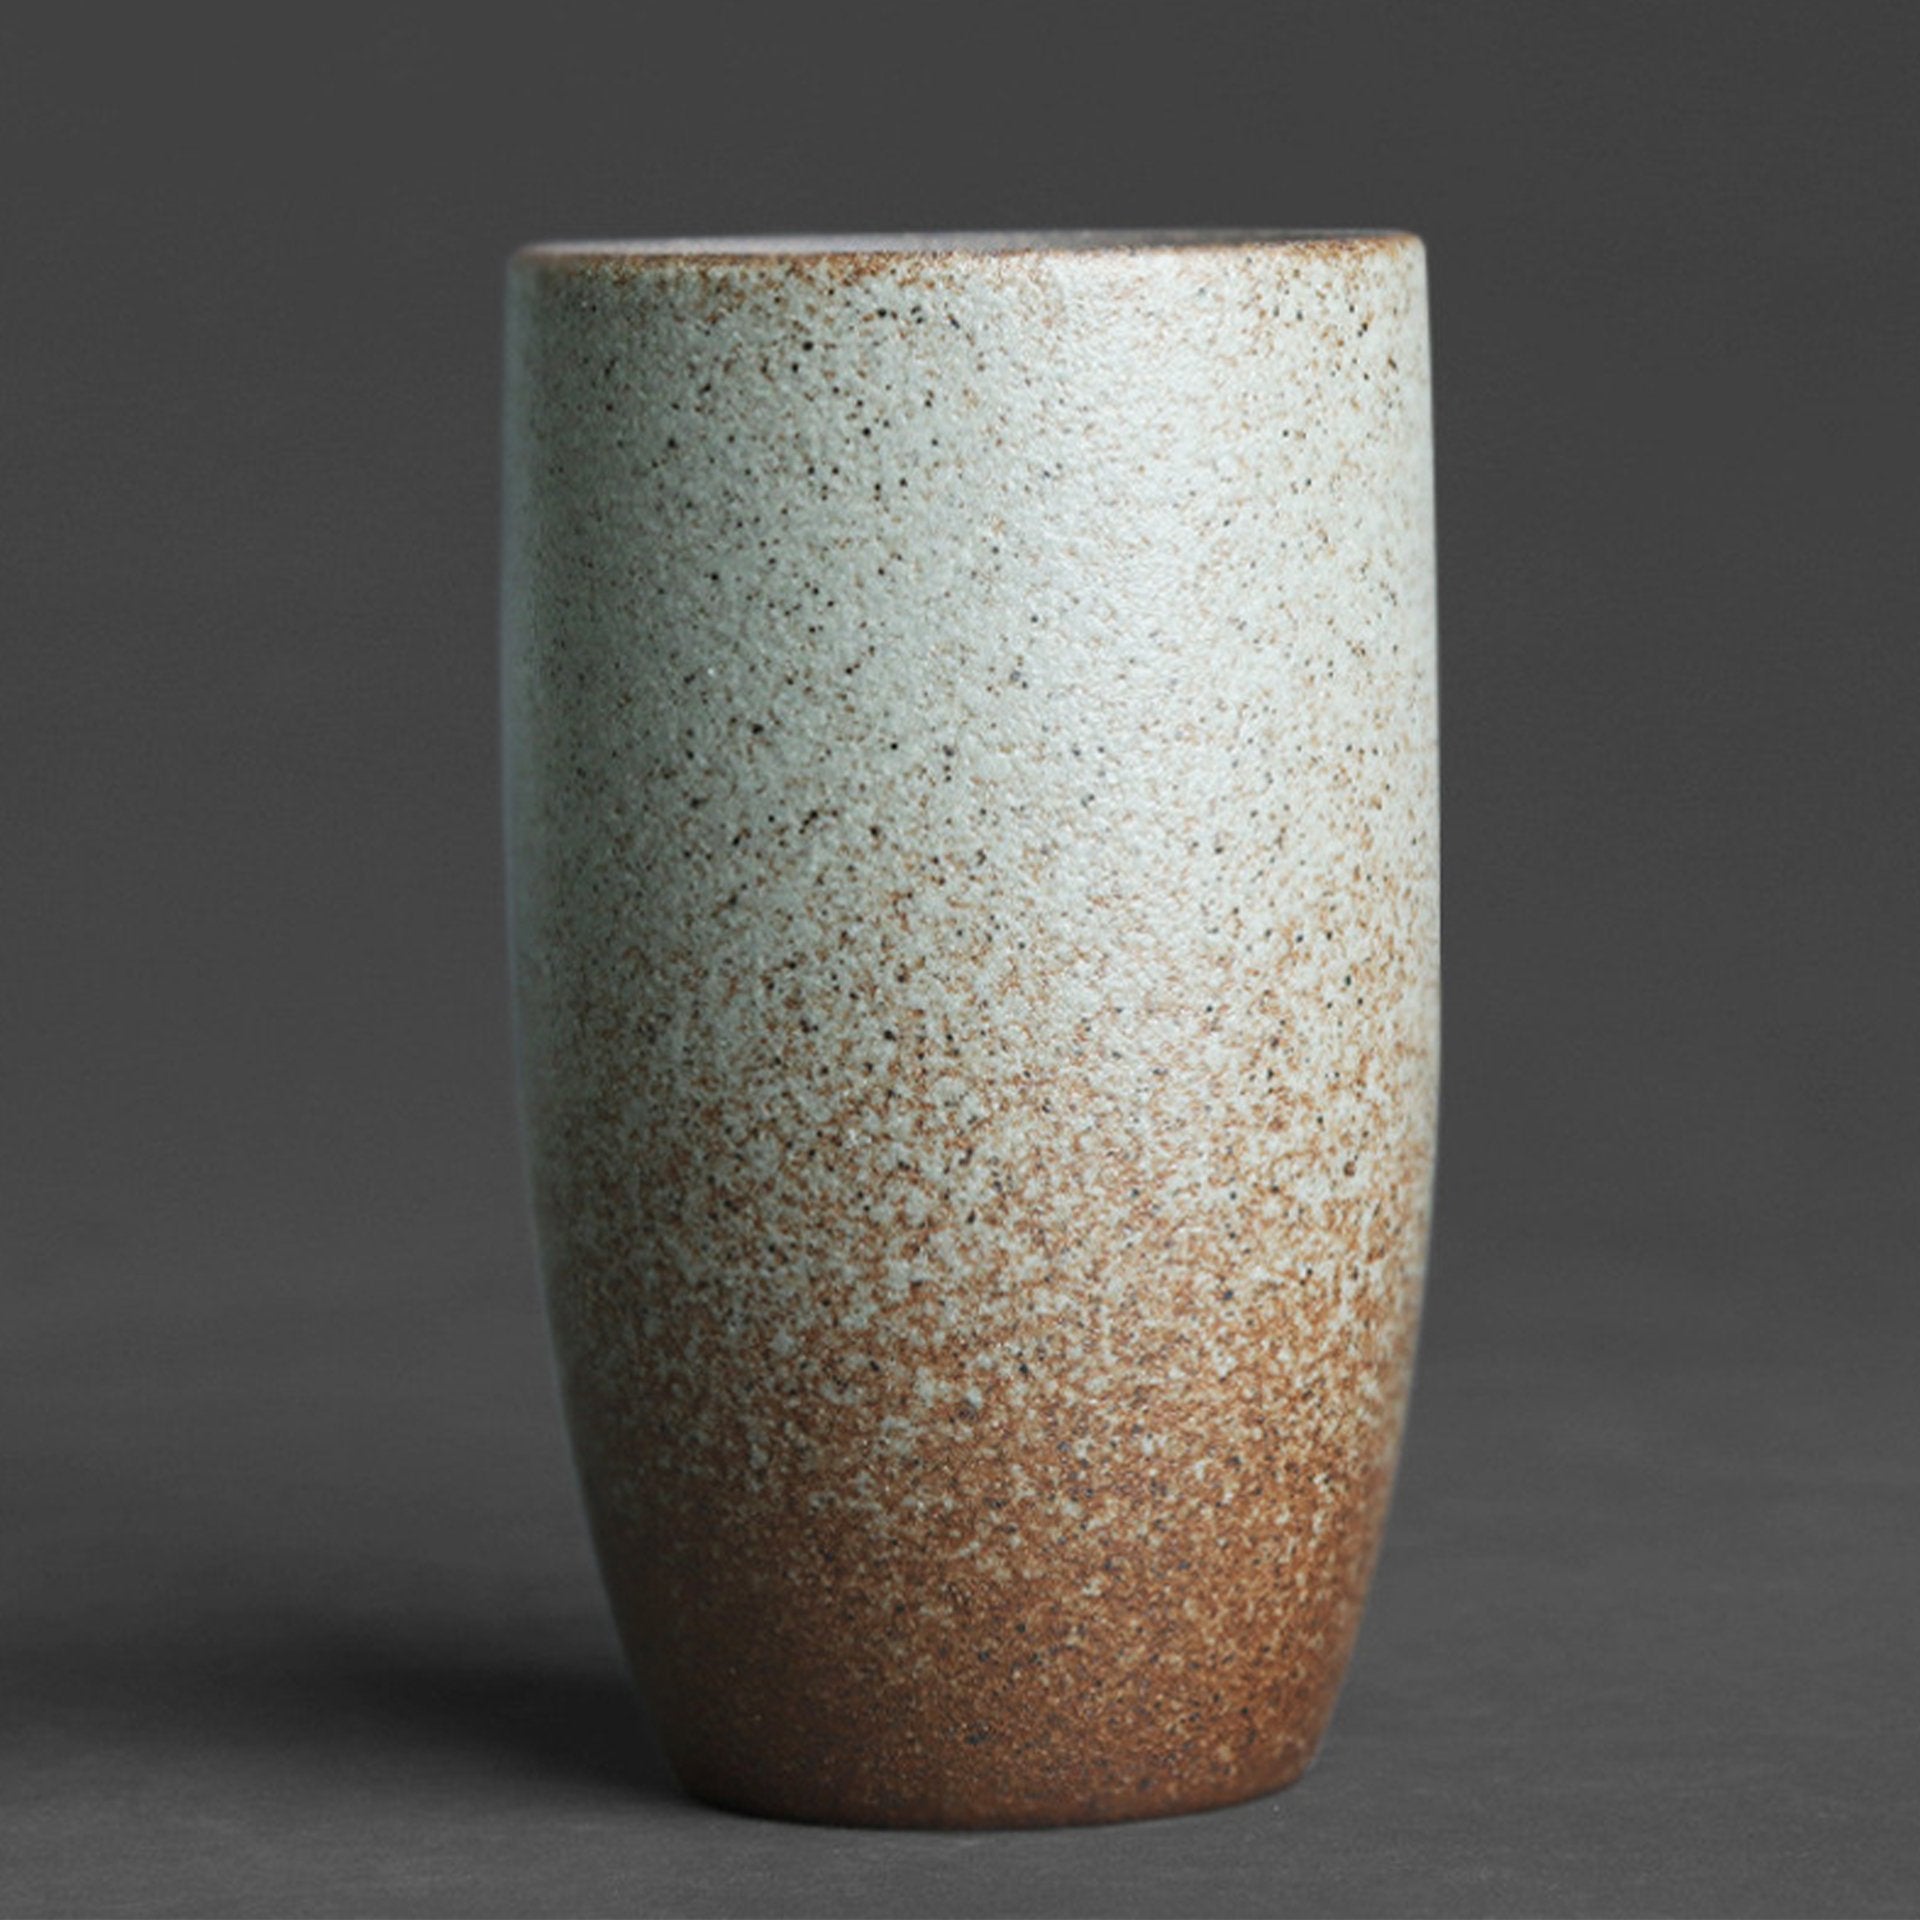 Tall beige ceramic cup on a gray background, featuring a speckled design.